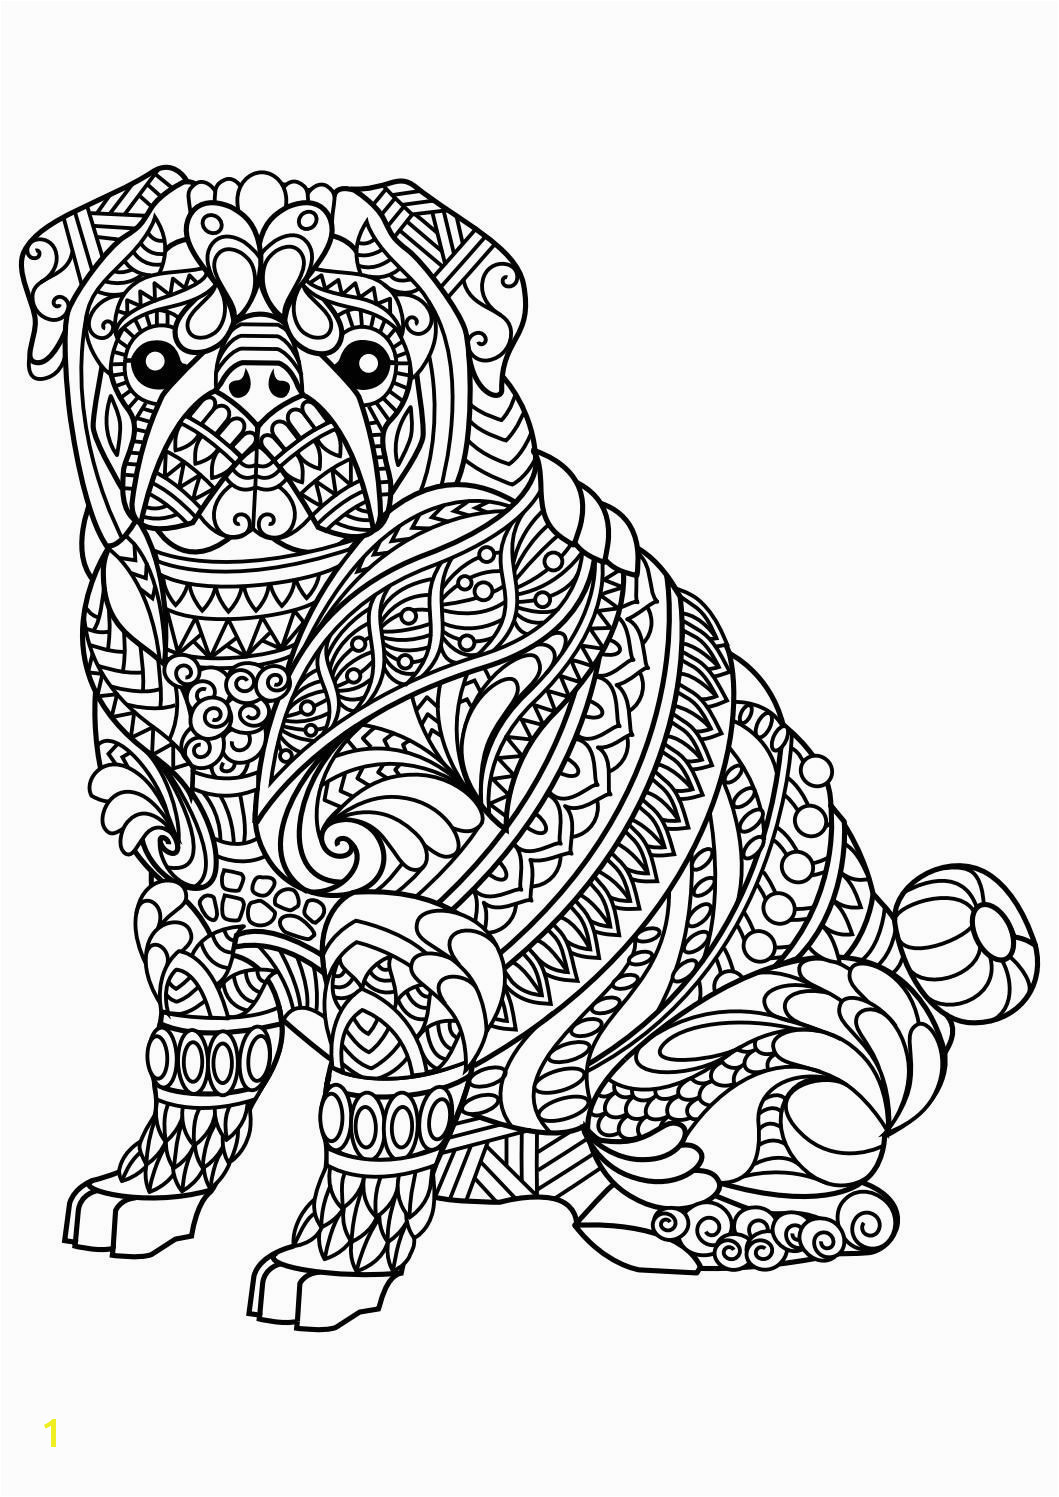 Free Printable Animal Coloring Pages for Adults Advanced Animal Coloring Pages Pdf Coloring Animals